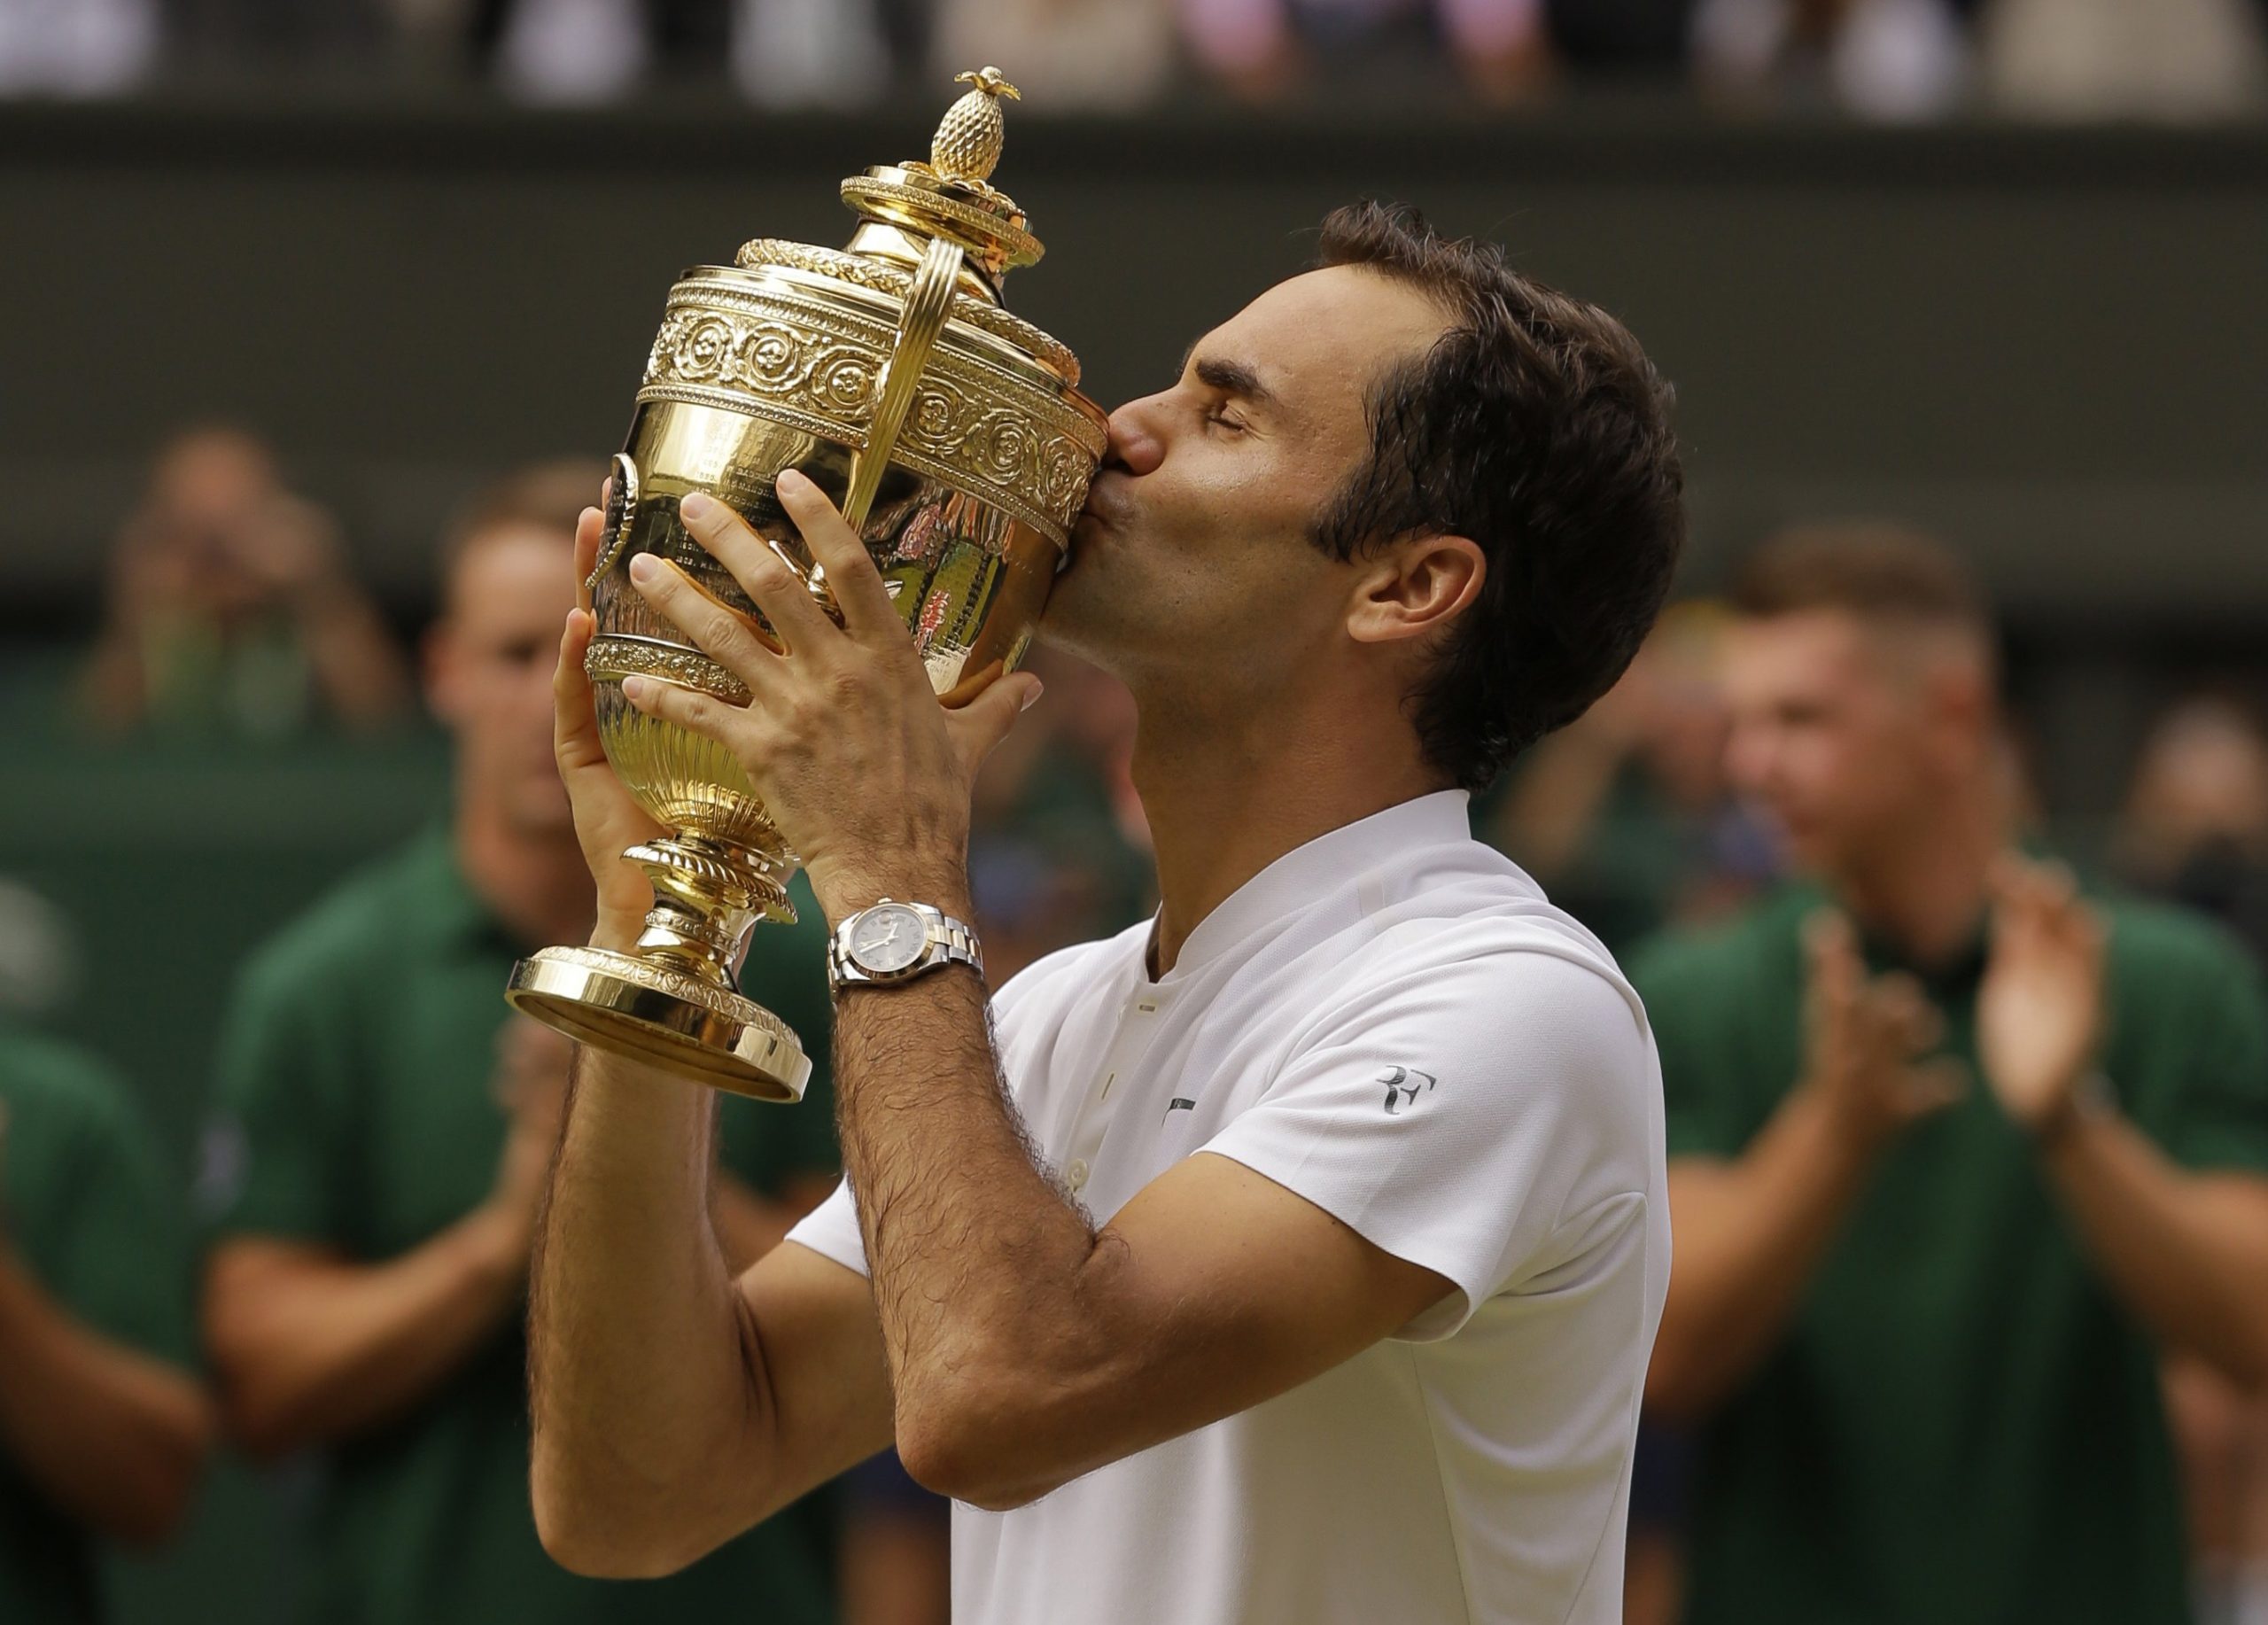 How many Wimbledon titles has Roger Federer won in his career?